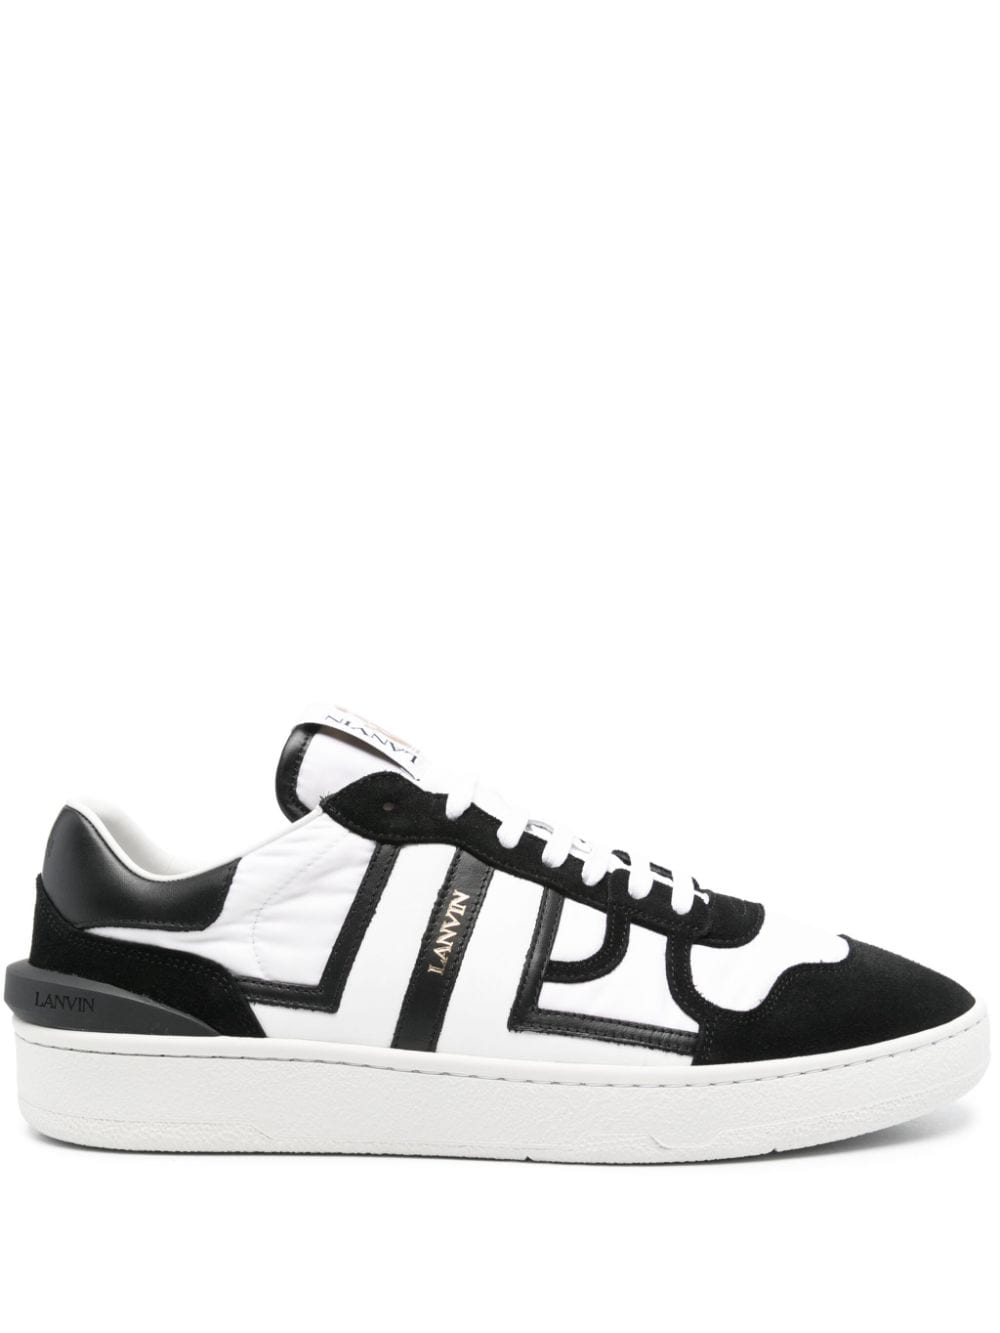 Lanvin panelled lace-up sneakers Black